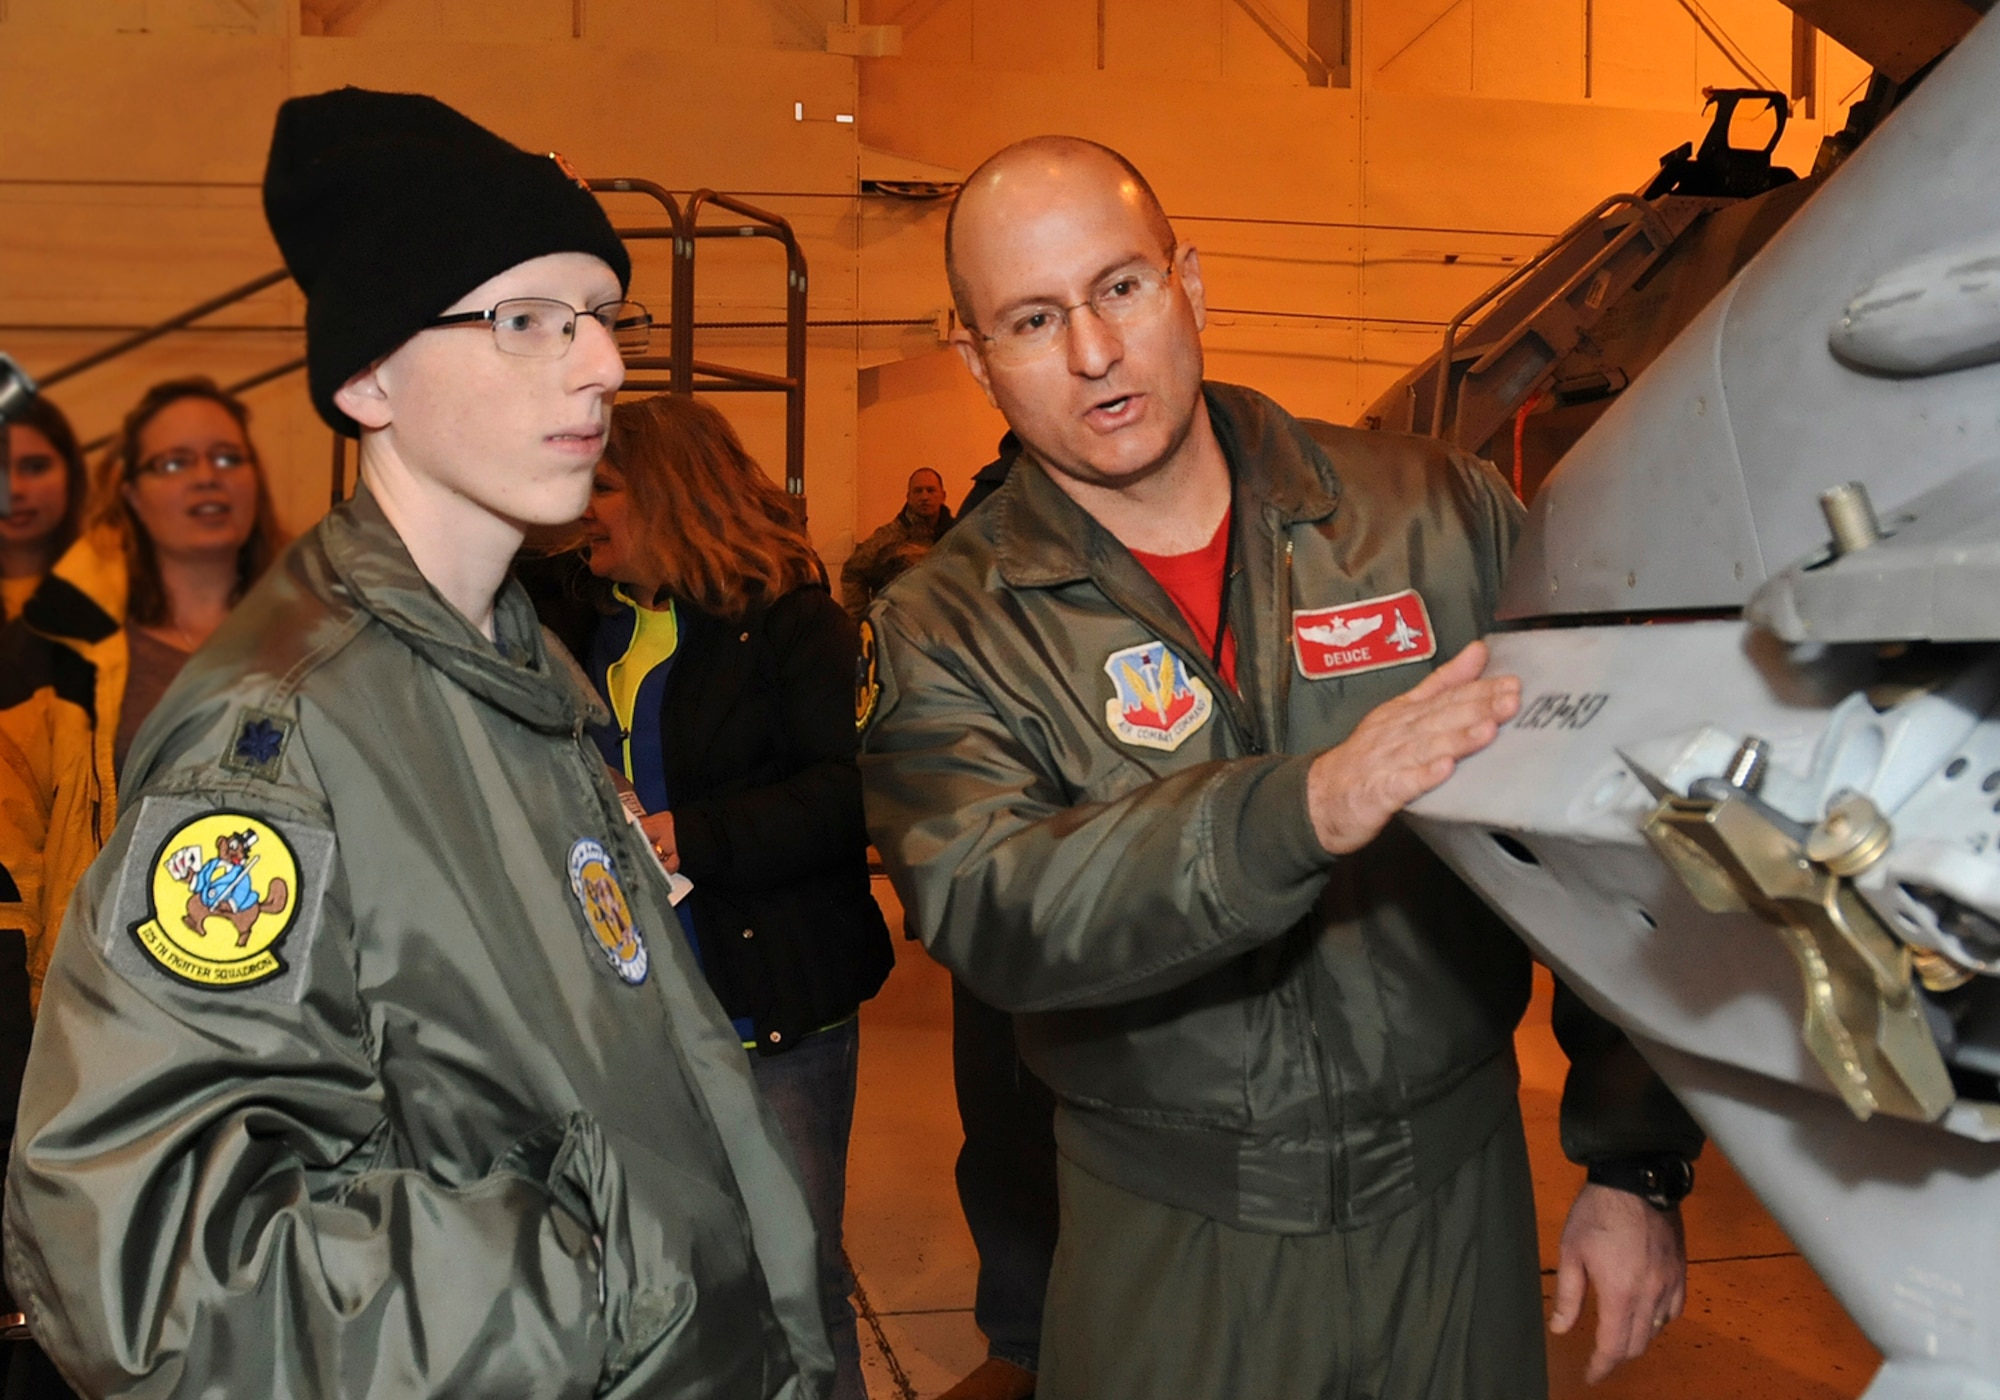 - Josh Payton, the 138th Fighter Wing's "pilot for a day" is briefed on the operations of an F-16 by Maj. Michael "Deuce" Scorsone Feb. 19, 2015, at the Tulsa Air National Guard base, Tulsa, Okla.  The pilot for a day program is intended to recognize and honor children with potentially life threatening illnesses and started at the 138th in May 2012, and has hosted seven children since it began.  (U.S. National Guard photo by Senior Master Sgt.  Preston L. Chasteen/Released)